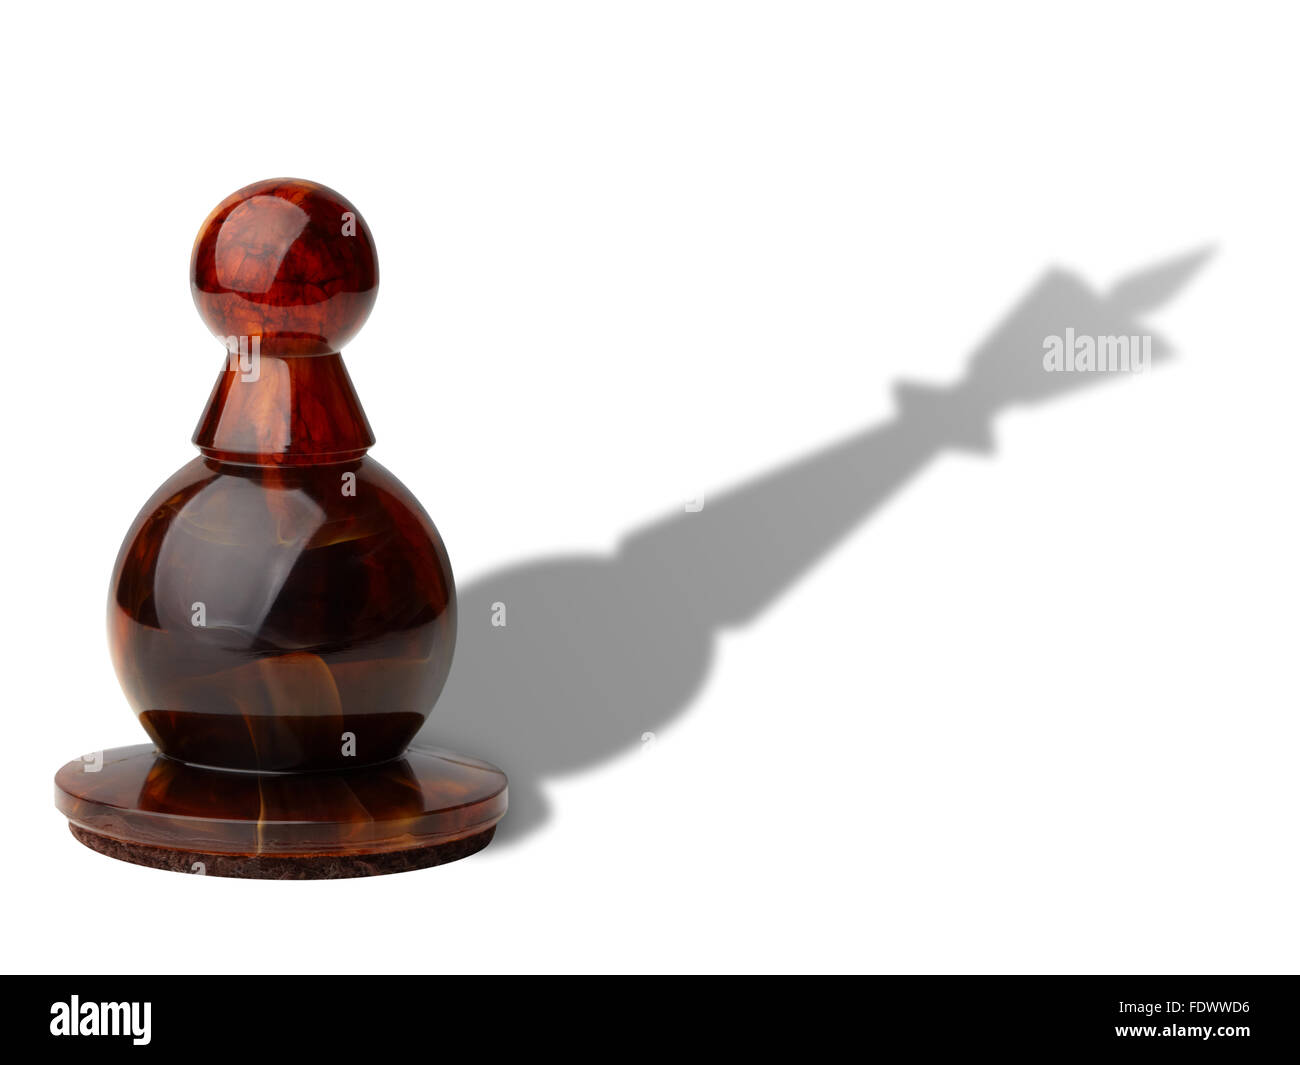 Chess pawn with king's shadow isolated on white background, clipping path included. Stock Photo